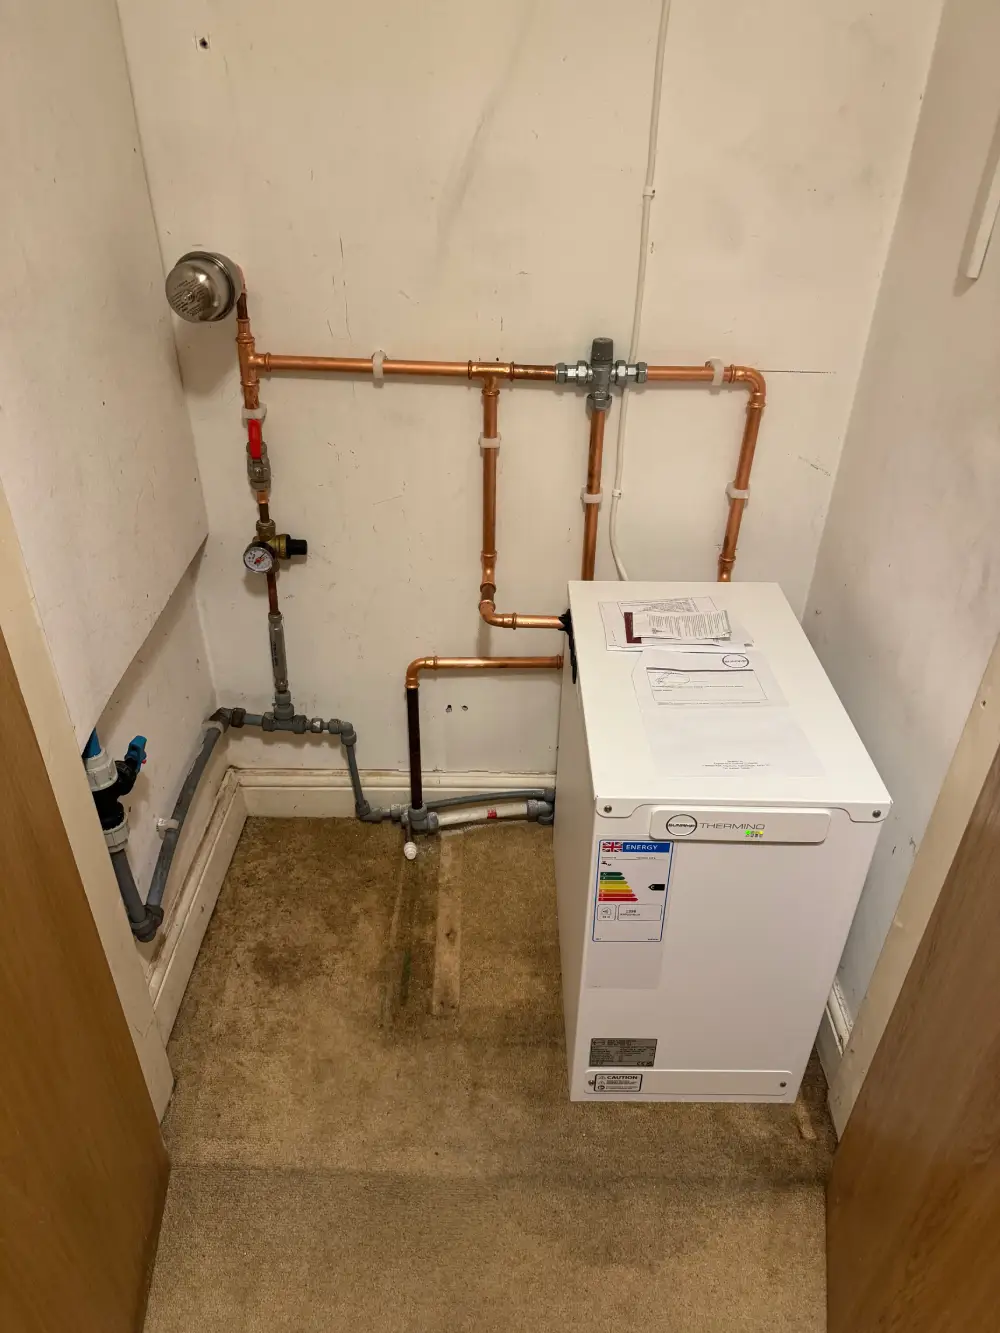 A Sunamp boiler designed to us less room than an standard hot water tank.